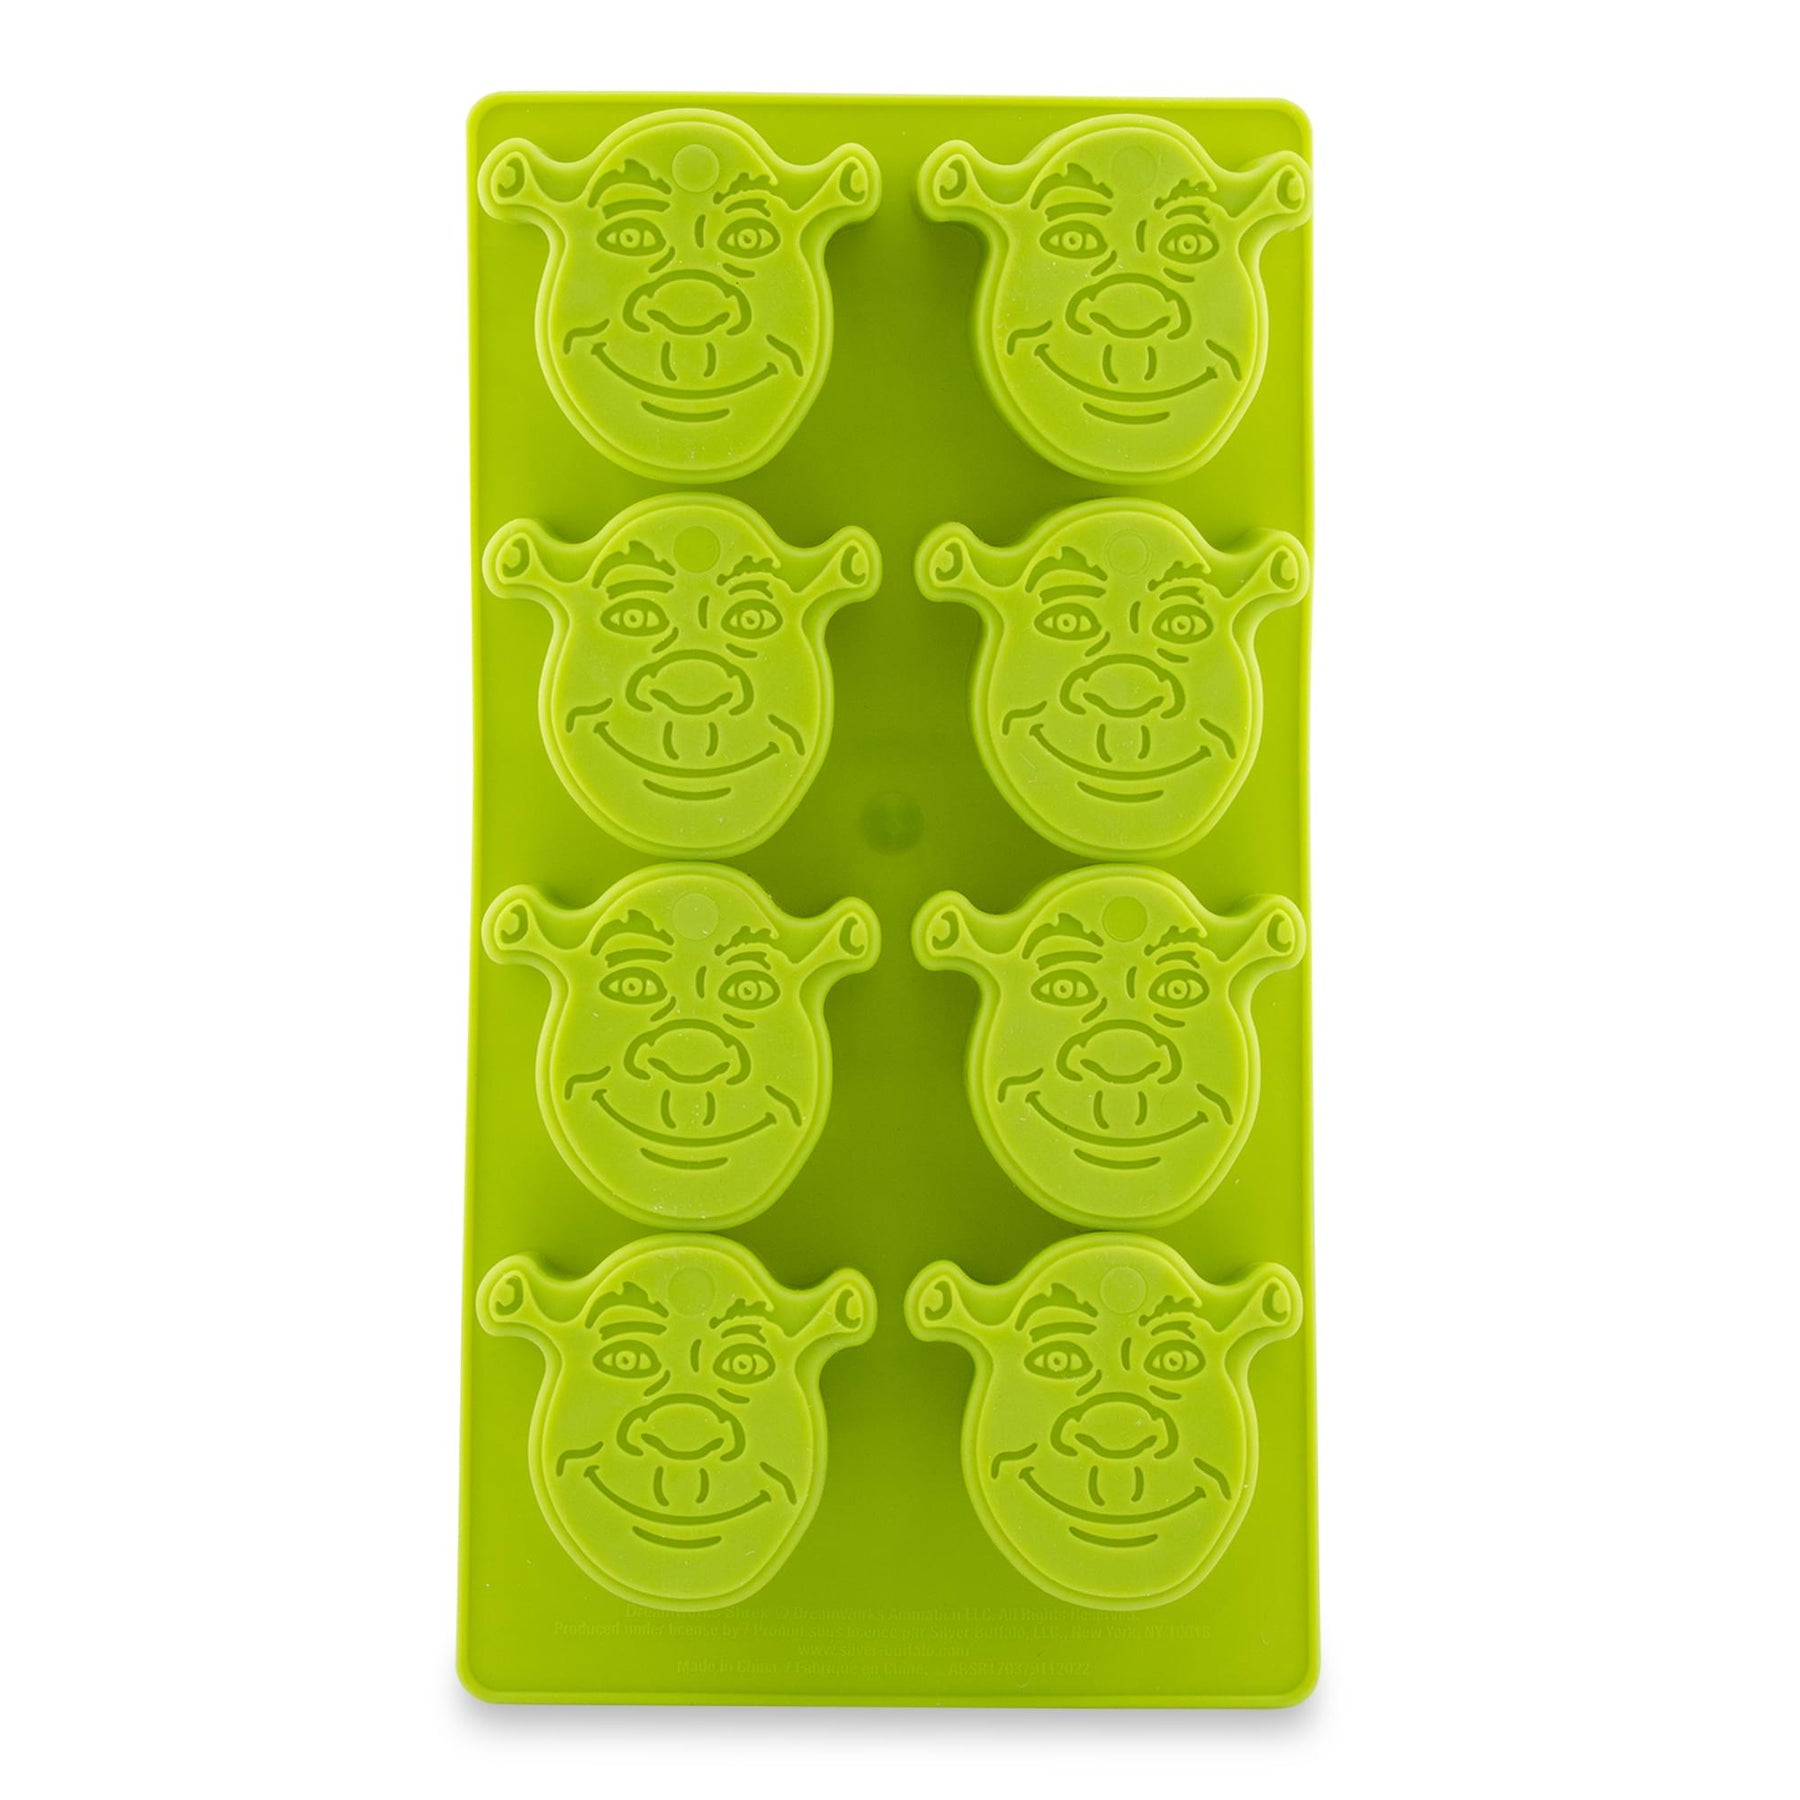 By now, you guys know I love making things in ice cube trays! HOLIDAY , Ice  Cube Tray